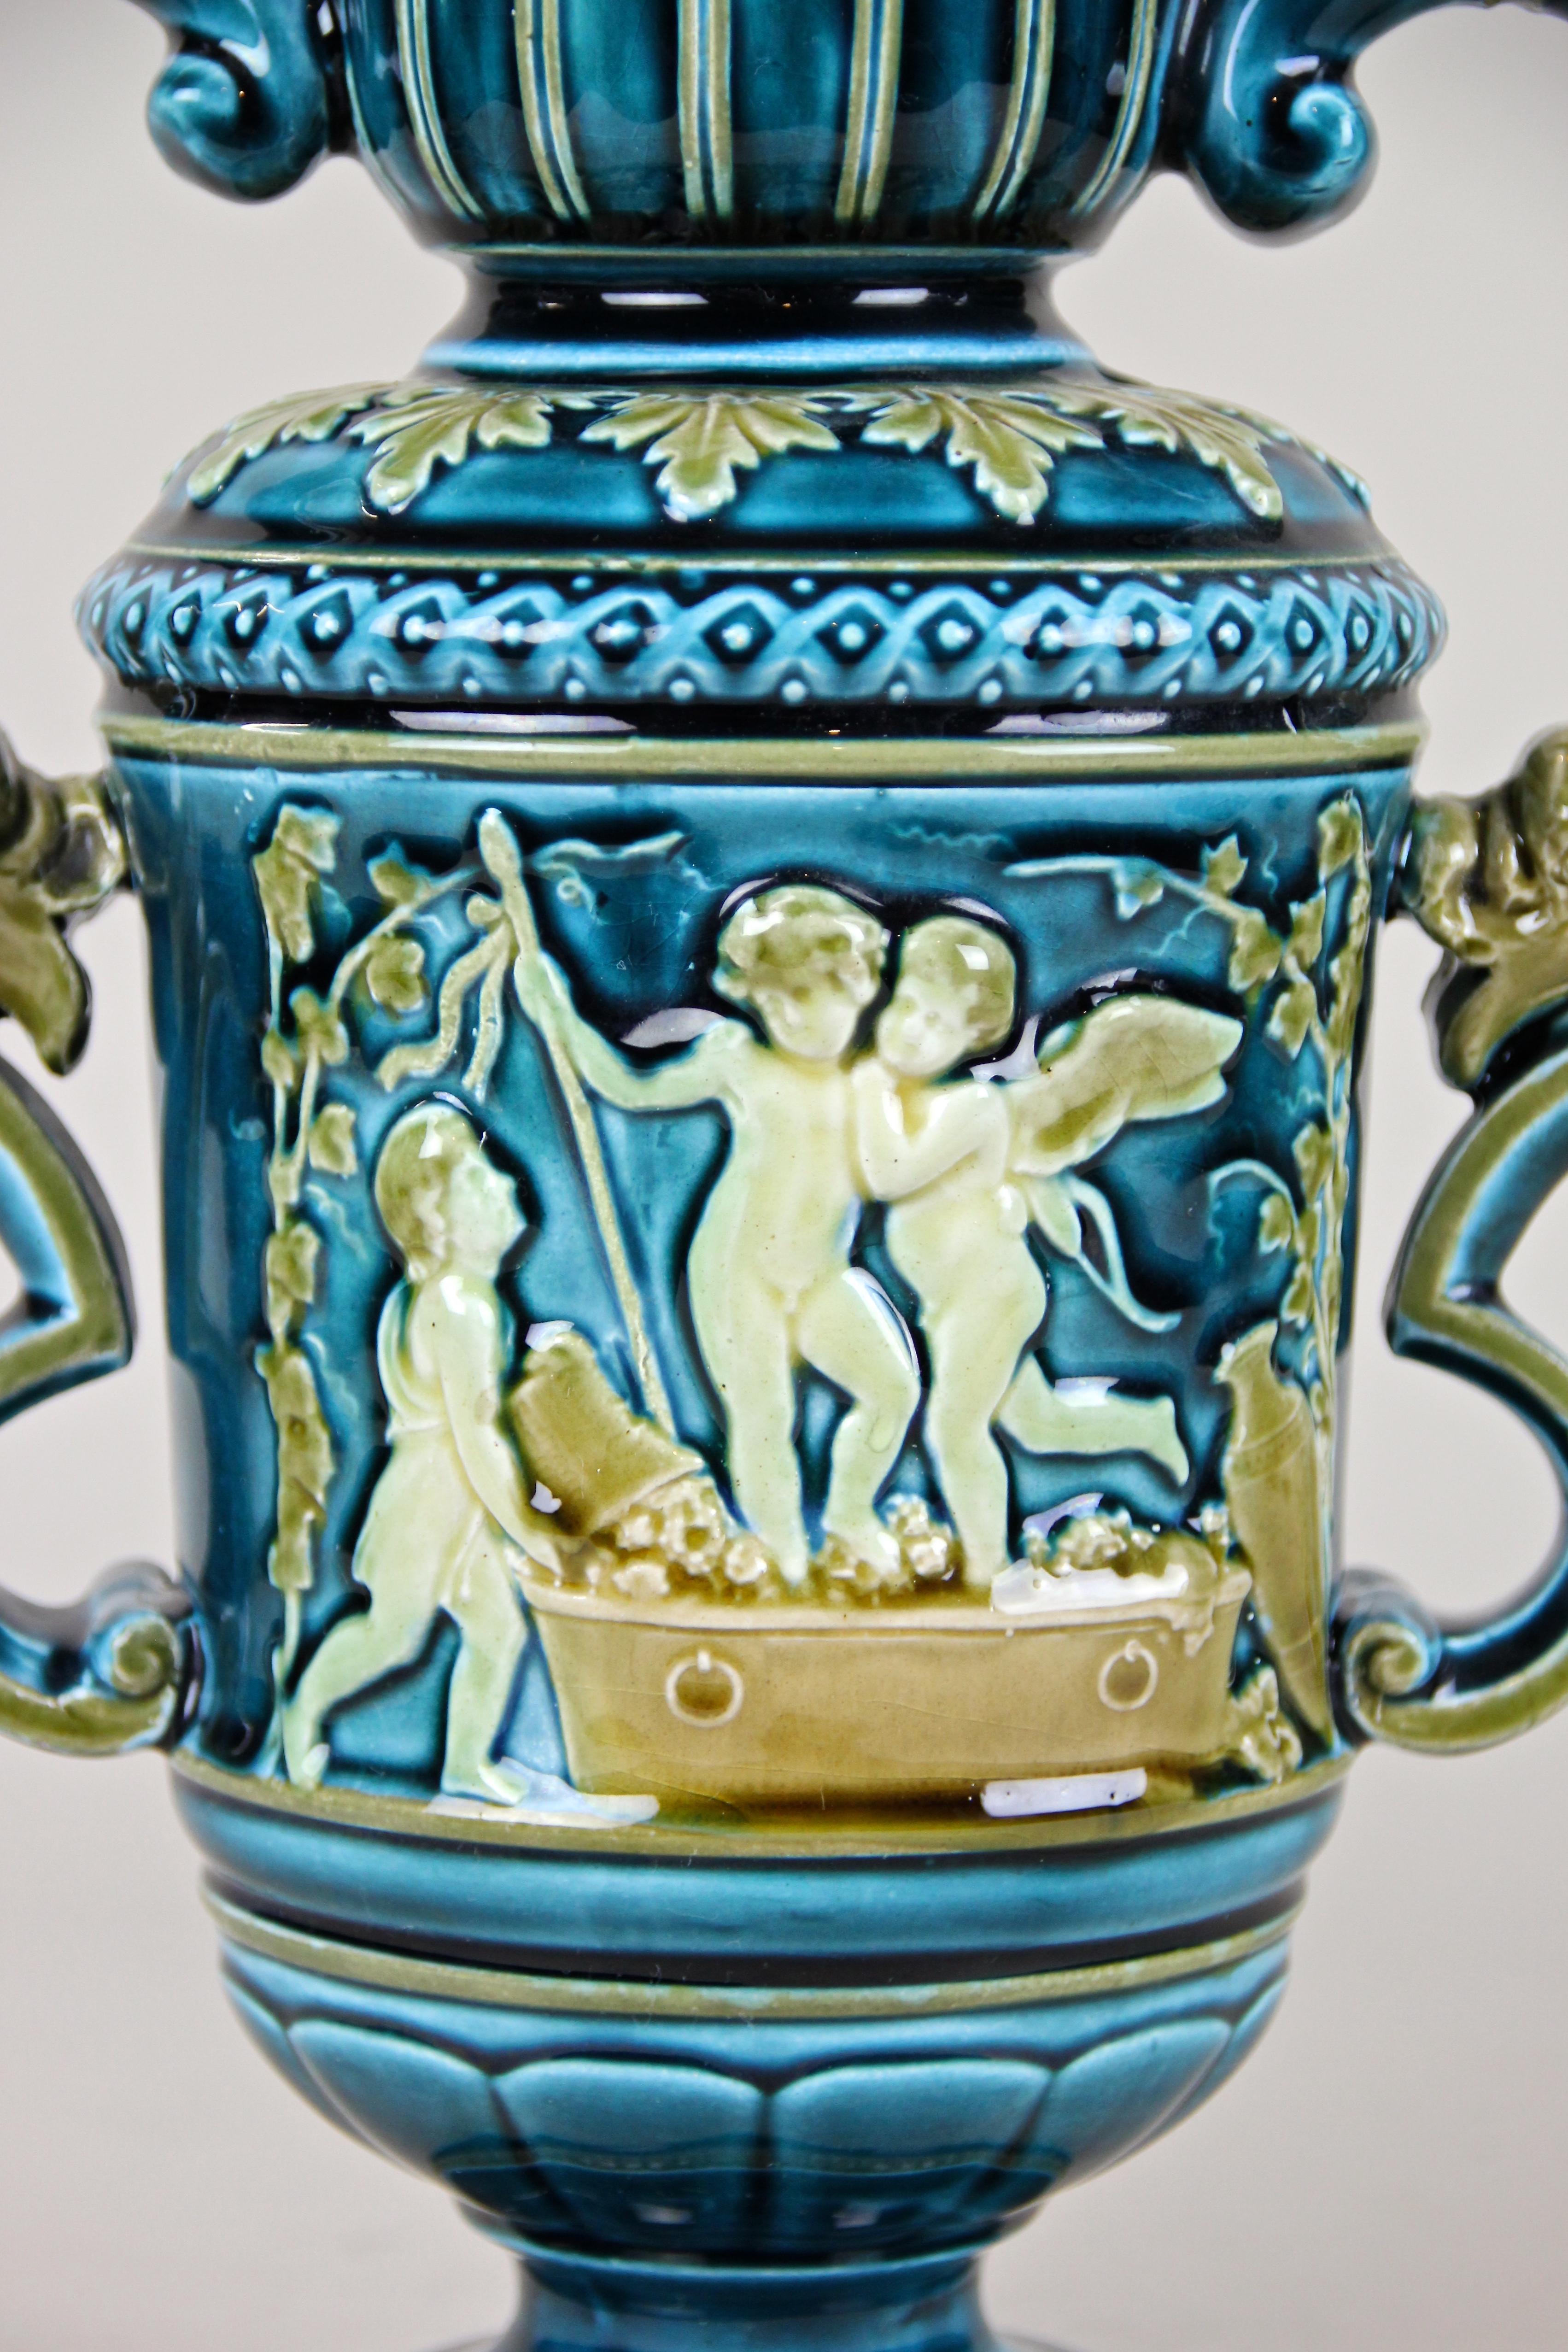 Decorative Art Nouveau Majolica vase made by the famous manufacture Schuetz Blansko, circa 1900. The early 20th century Amphora vase with an amazing design impresses with beautiful depictions of puttis, artfully shaped handles and a fantastic